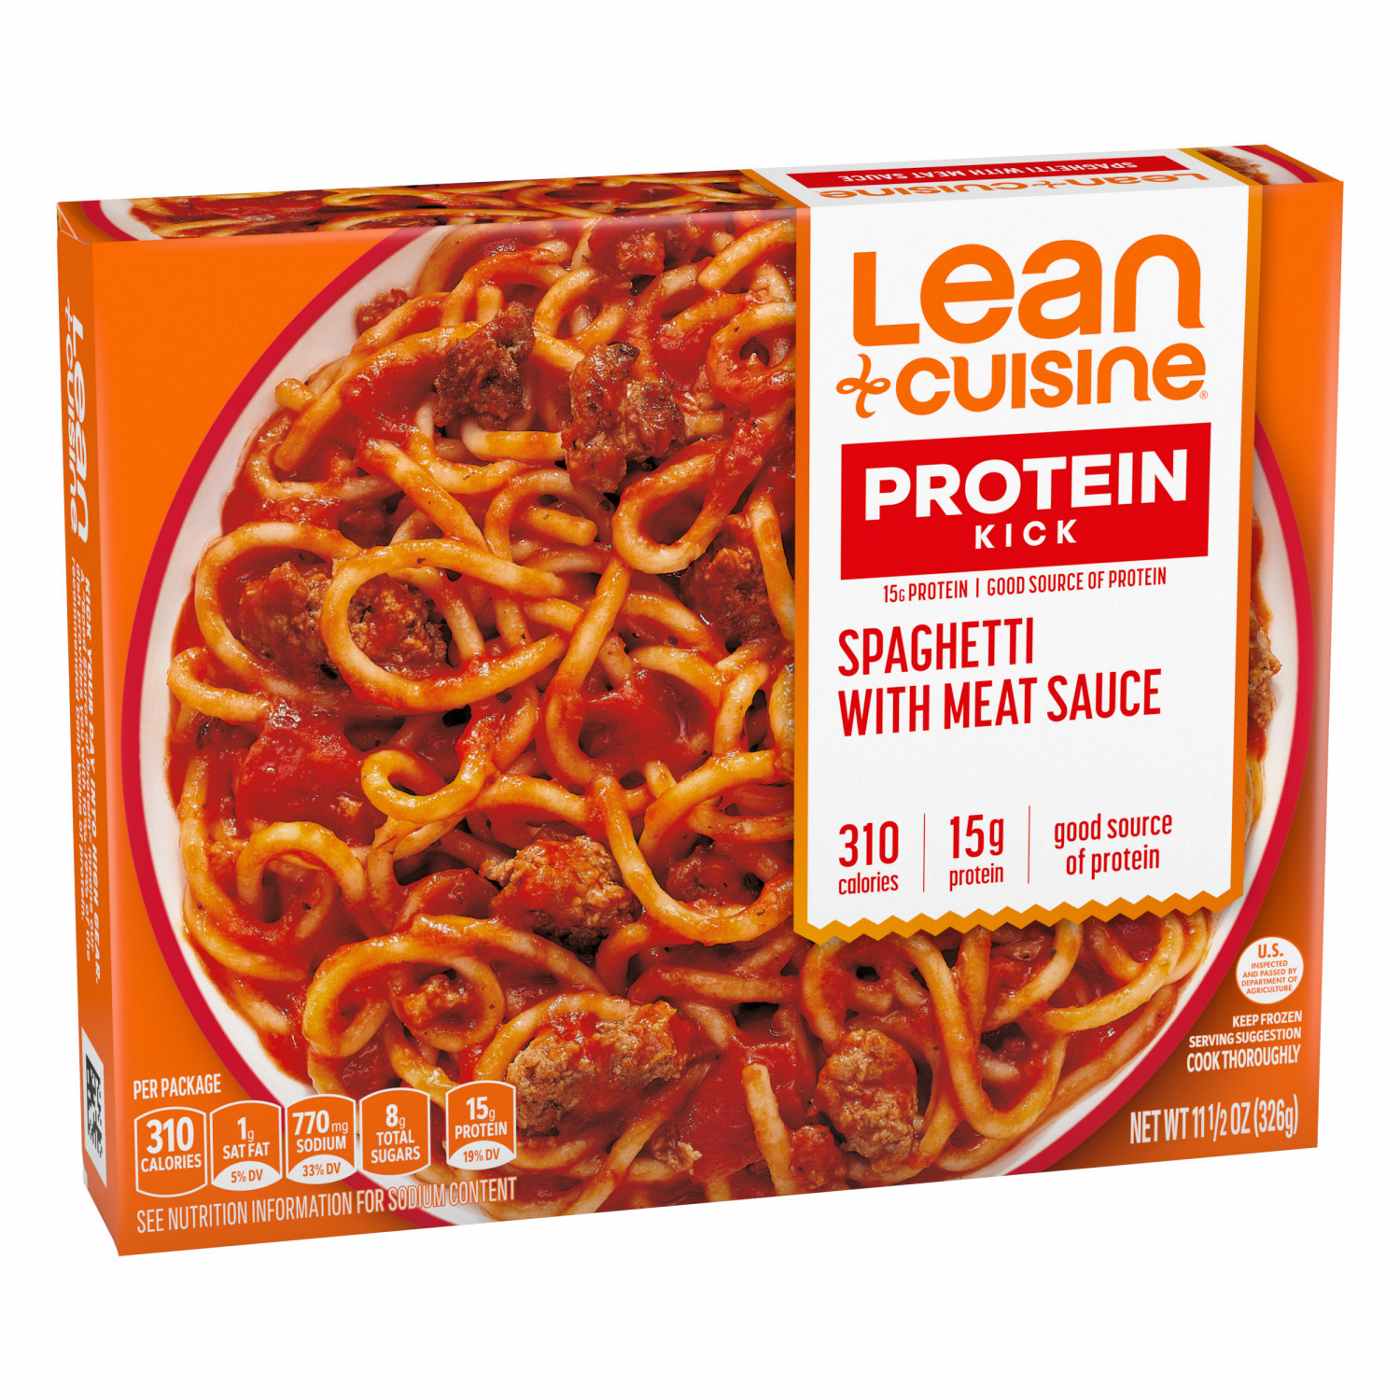 Lean Cuisine 15g Protein Spaghetti & Meat Sauce Frozen Meal; image 6 of 6